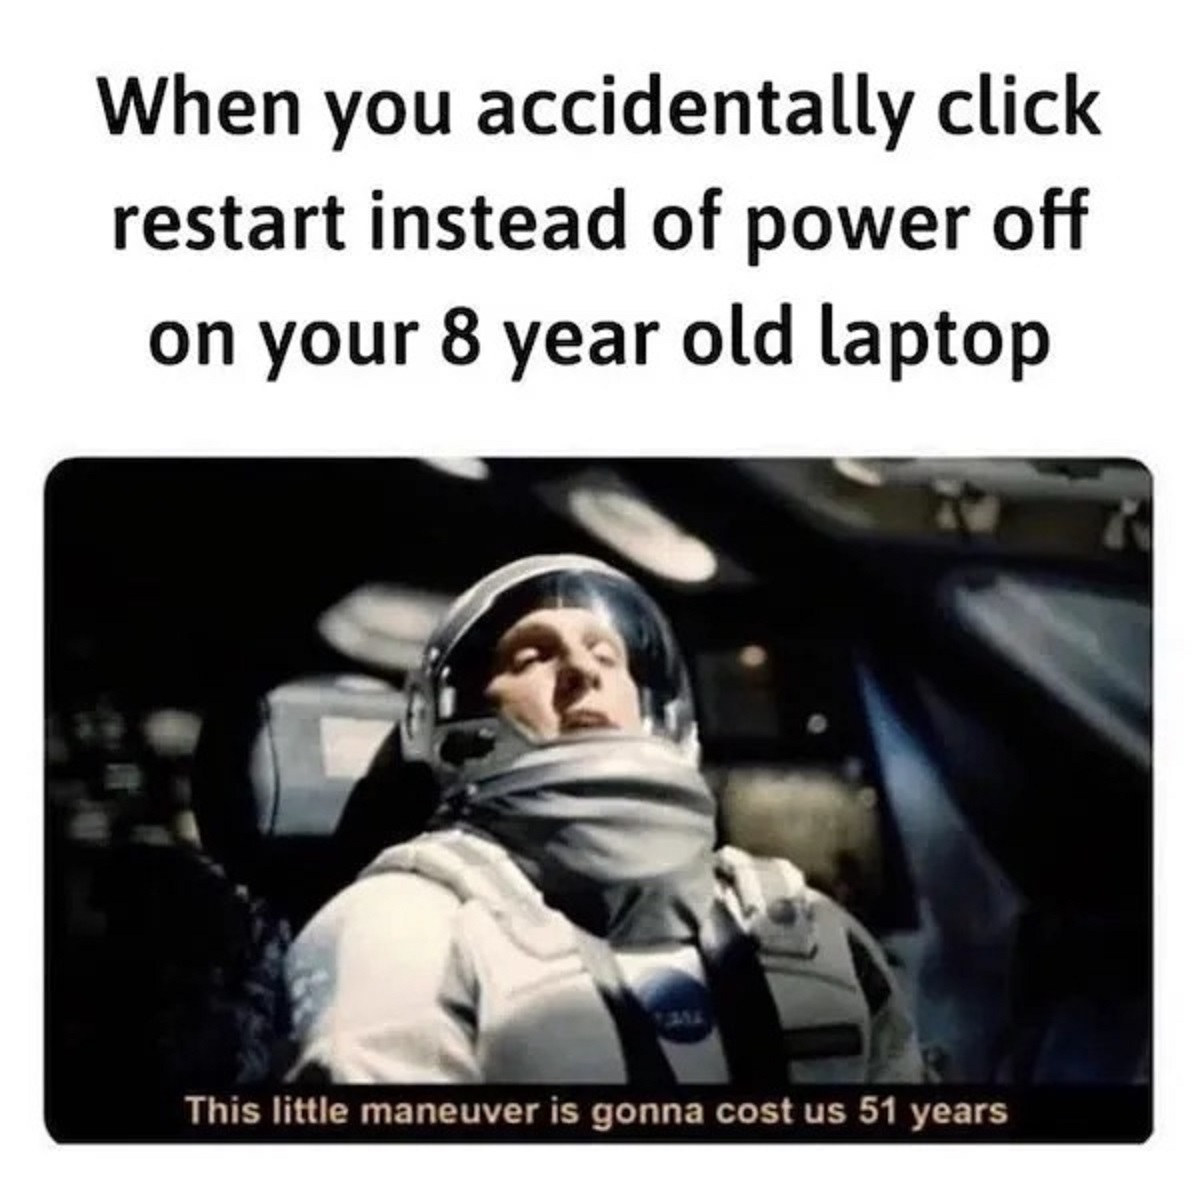 photo caption - When you accidentally click restart instead of power off on your 8 year old laptop This little maneuver is gonna cost us 51 years